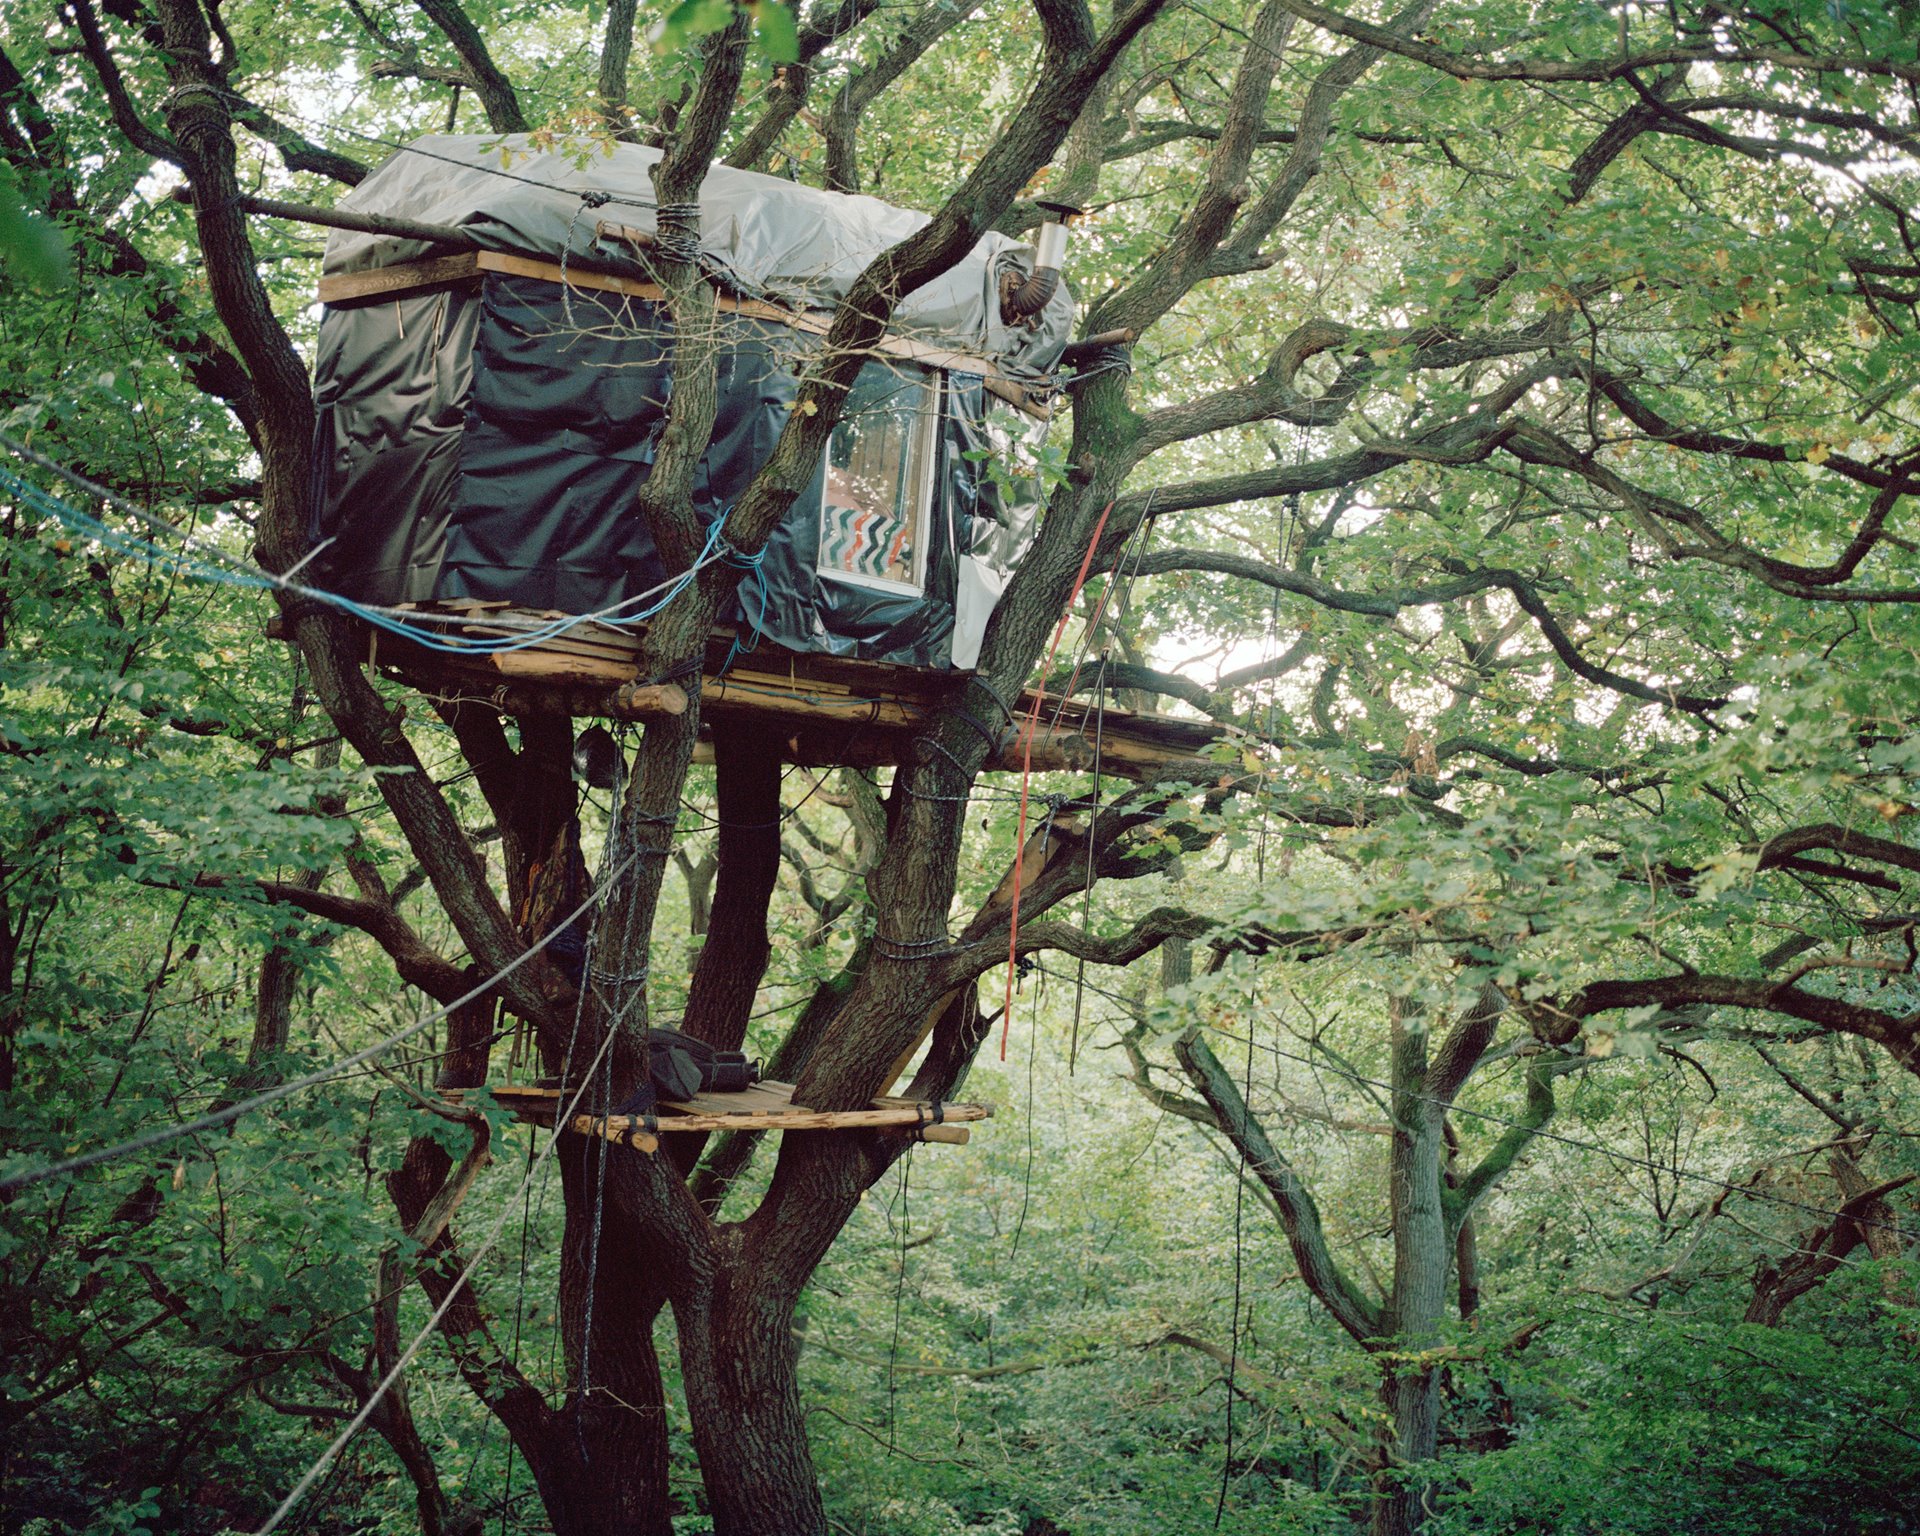 Orka, a treehouse belonging to the Gallien treehouse village in Hambach Forest, near Kerpen, Germany, was demolished during police evictions in 2018. Activists built and occupied the treehouses between 2016 and 2018 , the highest being about 25 meters above ground level. Their inaccessibility made evictions difficult.